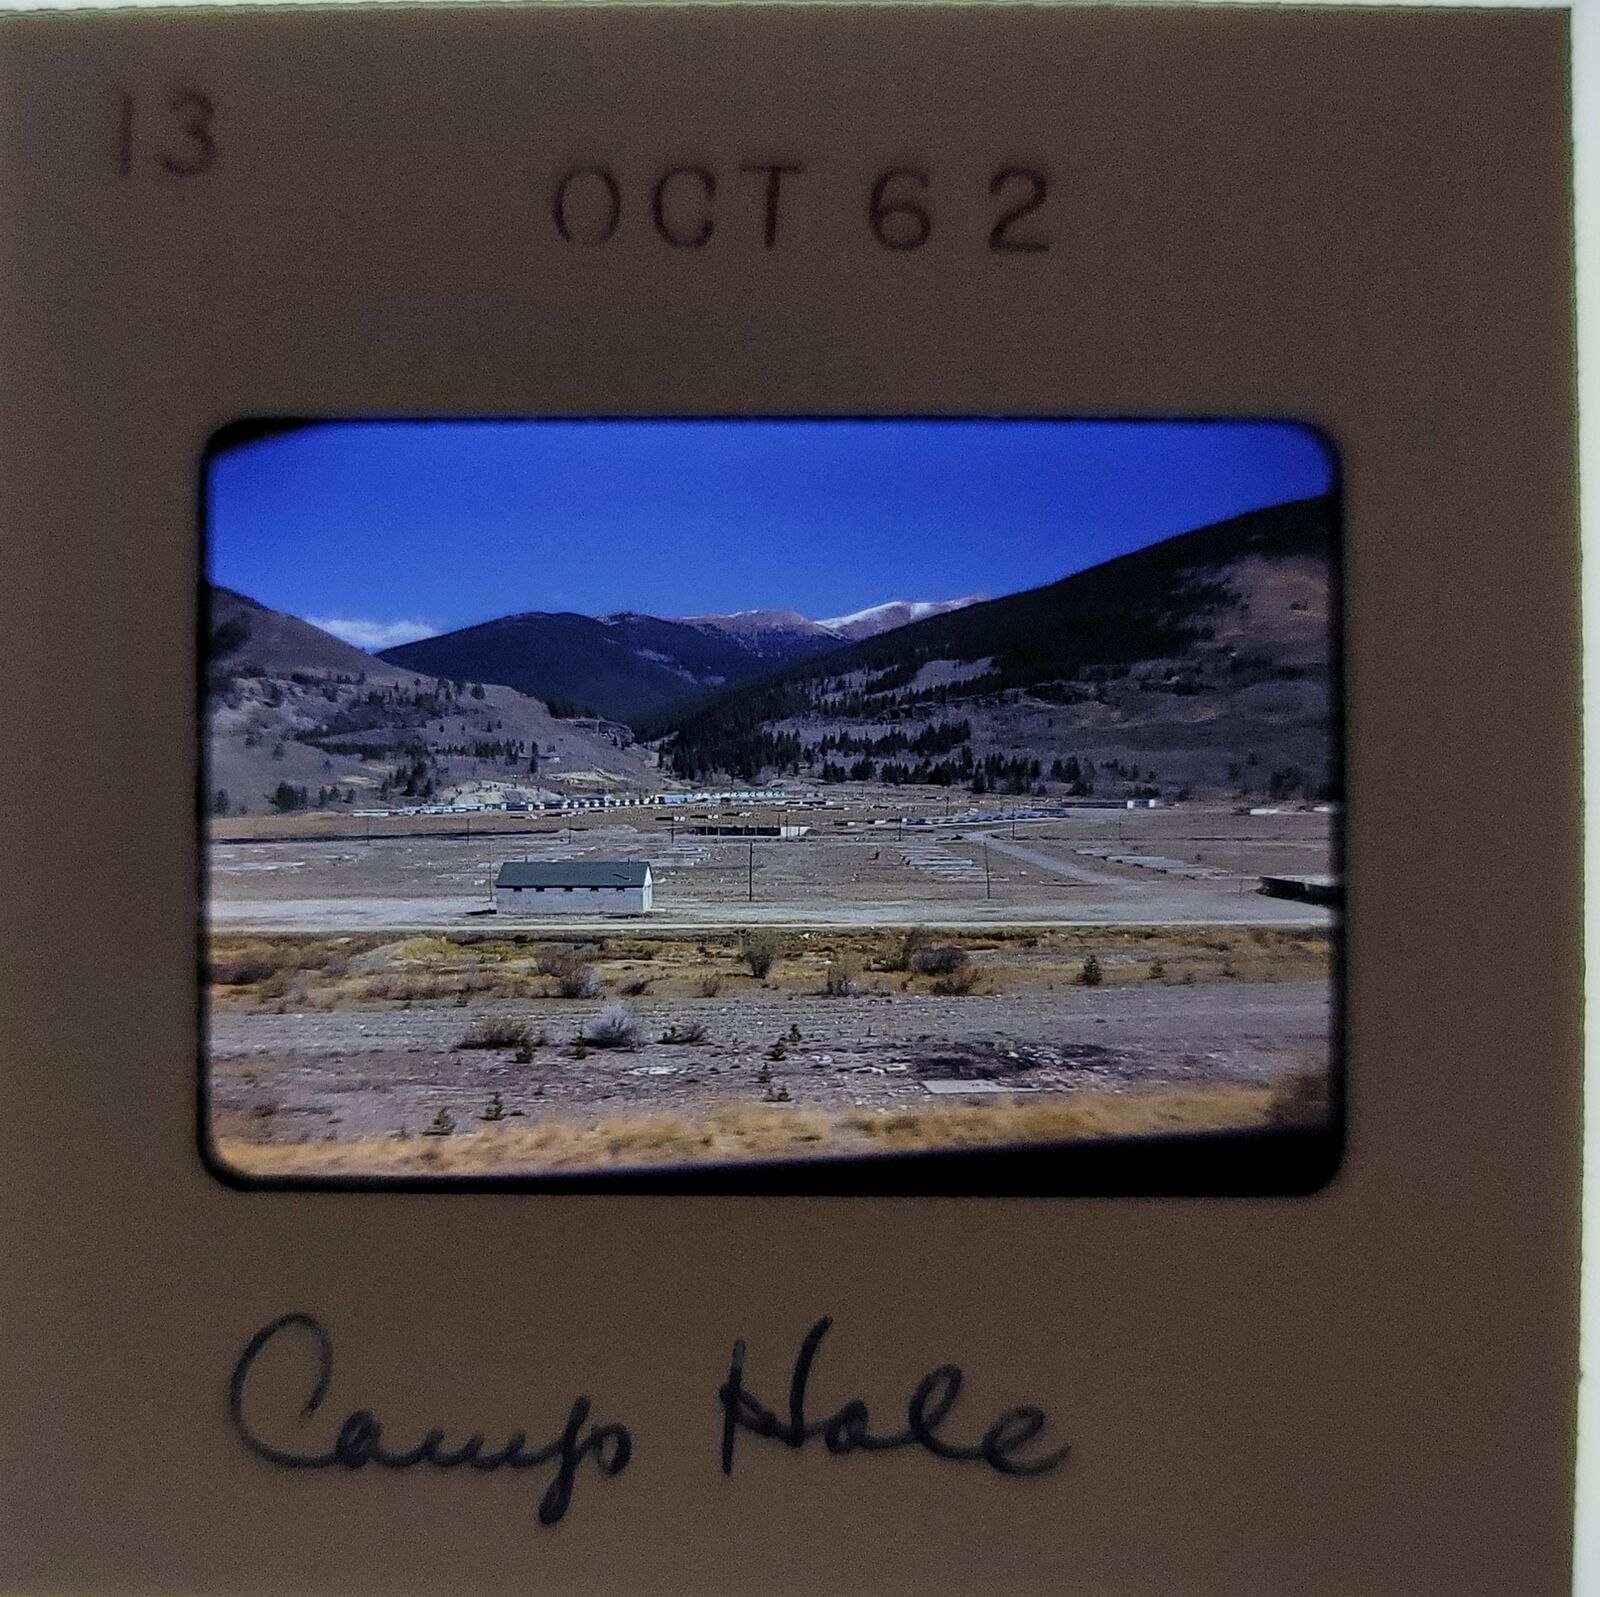 1960s Slide Camp Hale building in mountainous valley